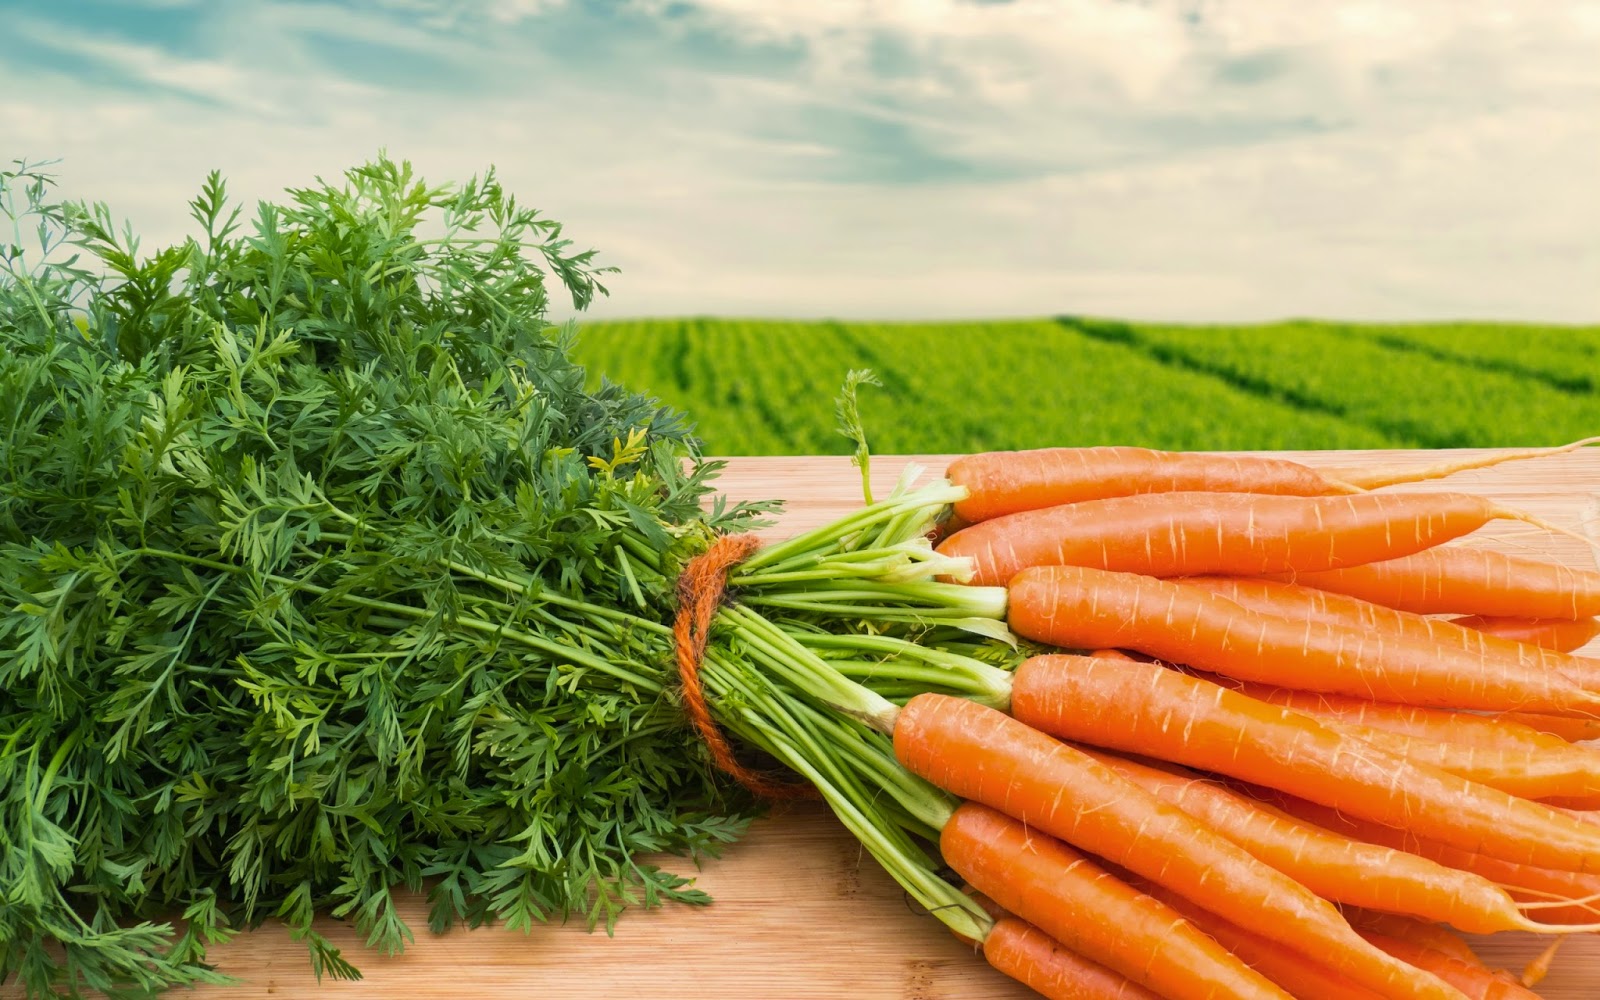 Great Carrot Wallpaper Full HD Pictures